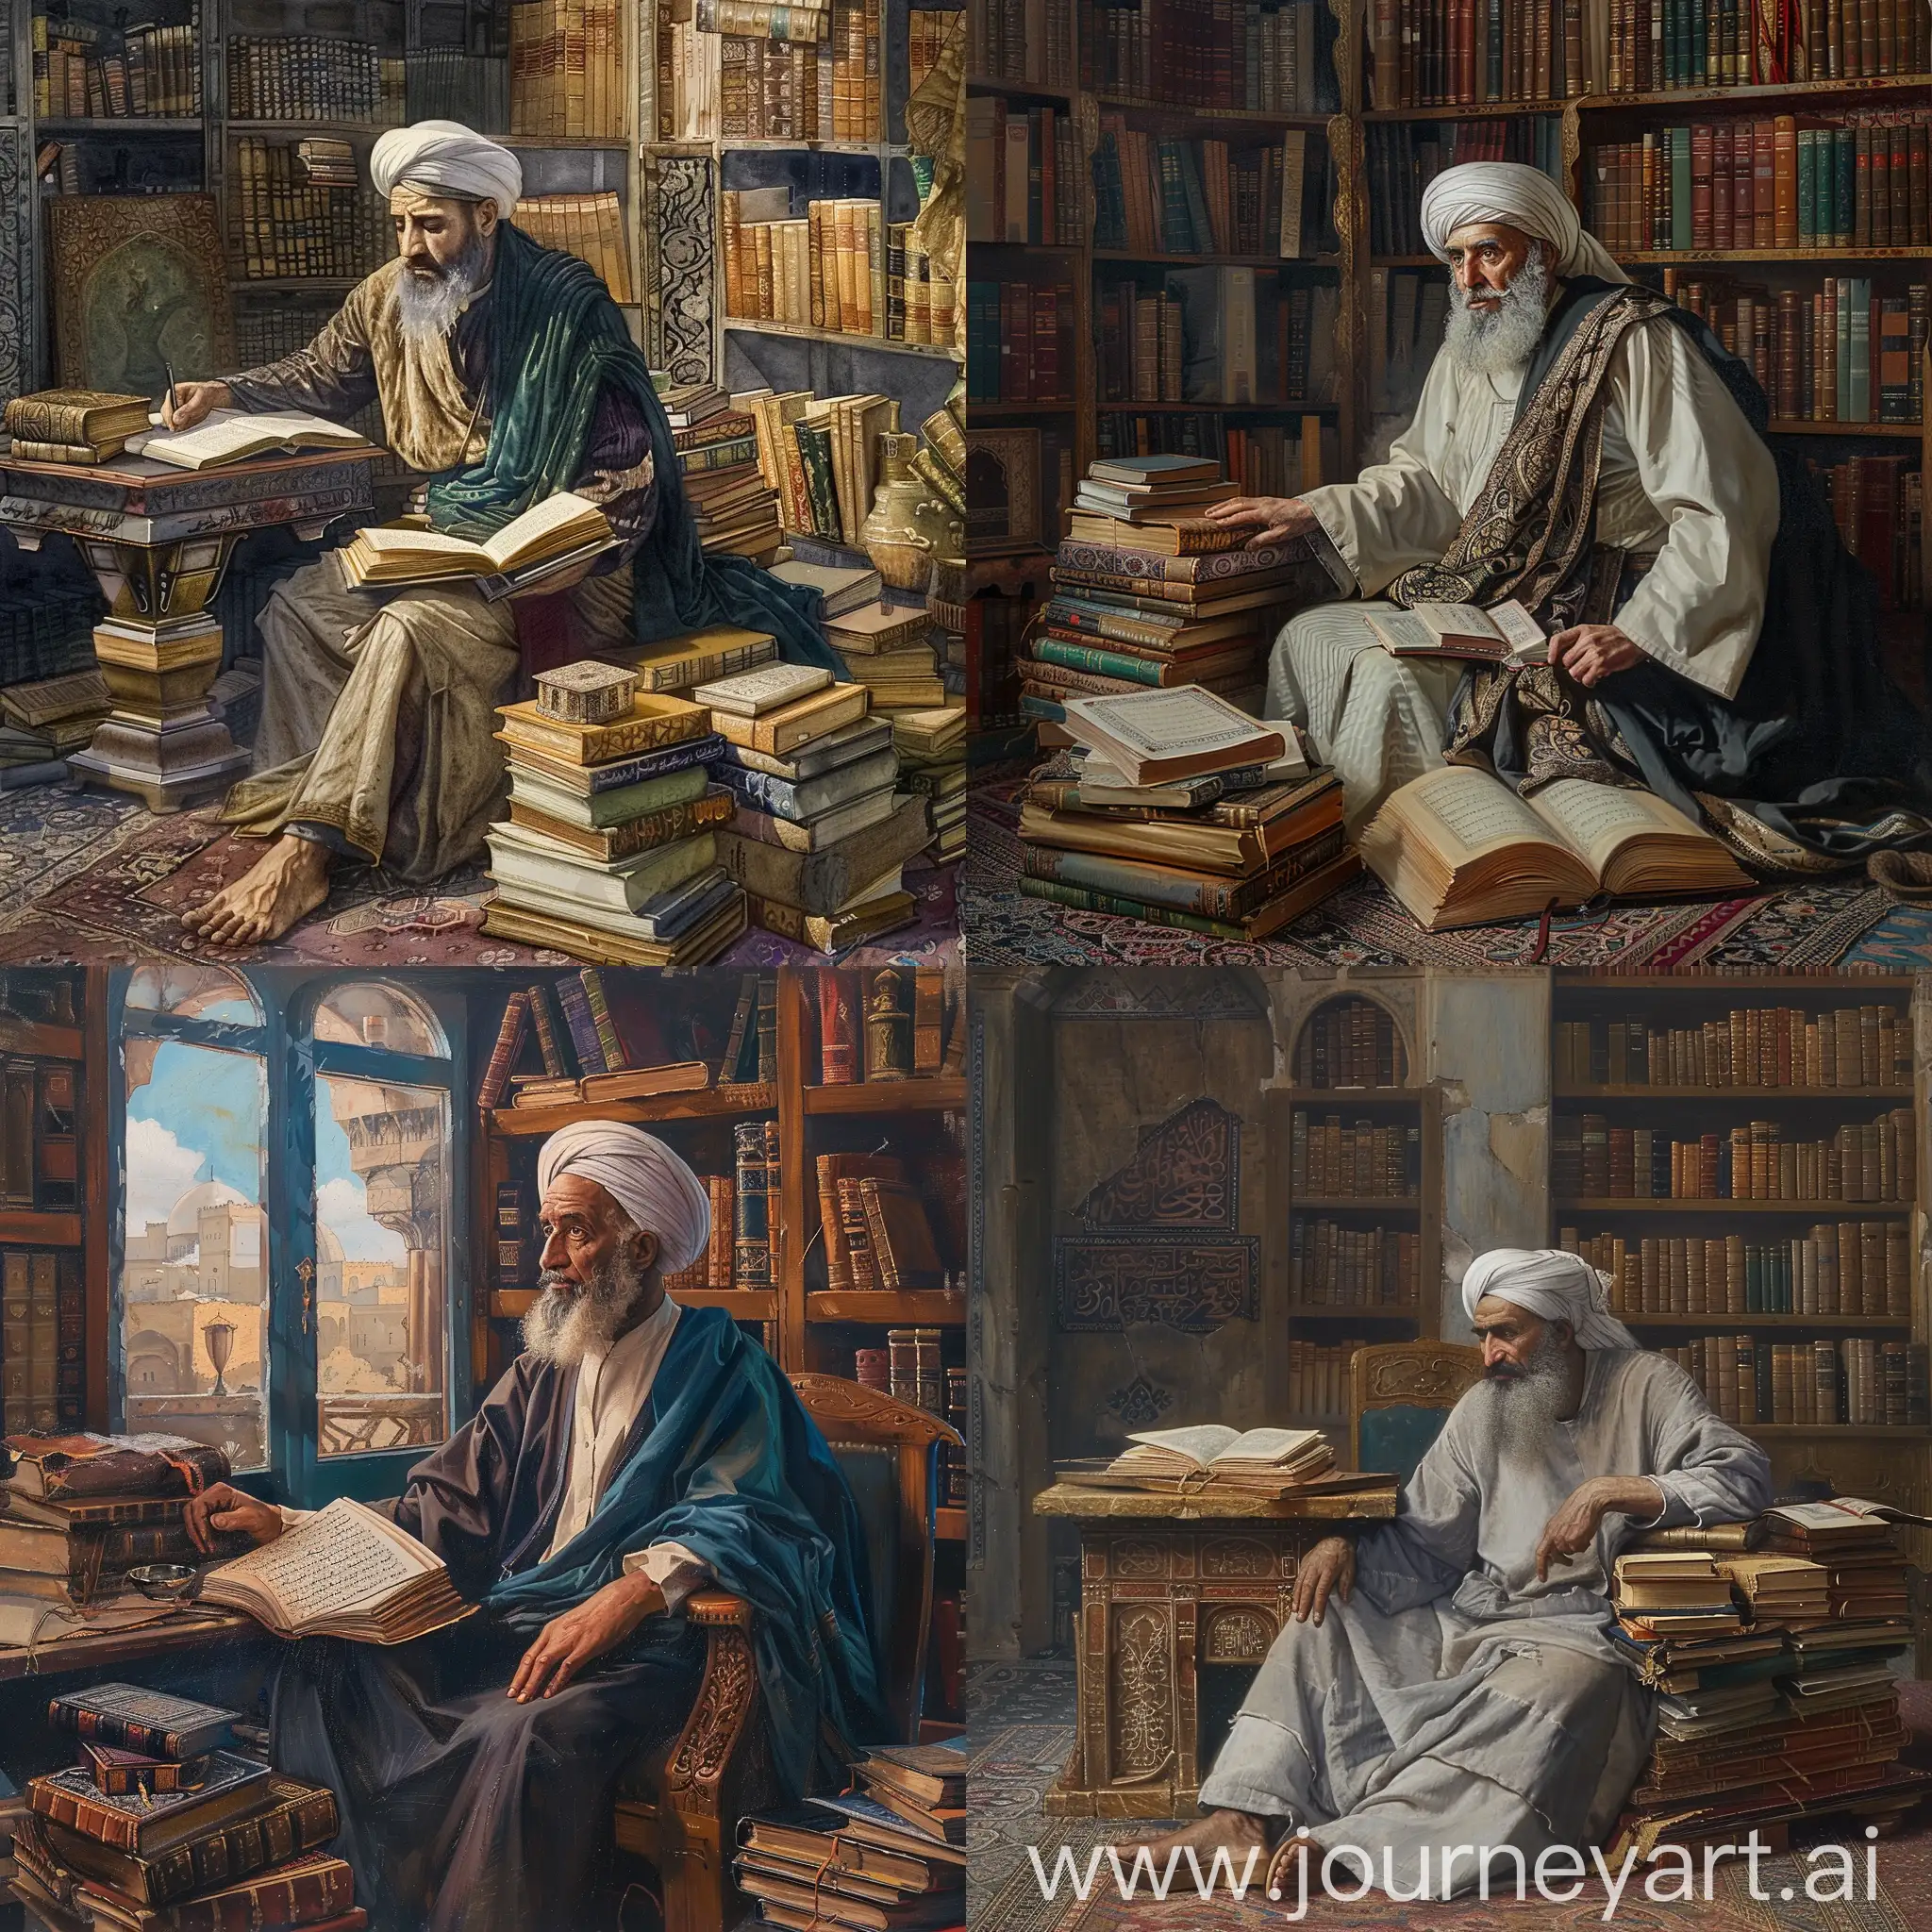 Ibn-Sina-Persian-Scholar-and-Doctor-in-His-Study-with-Books